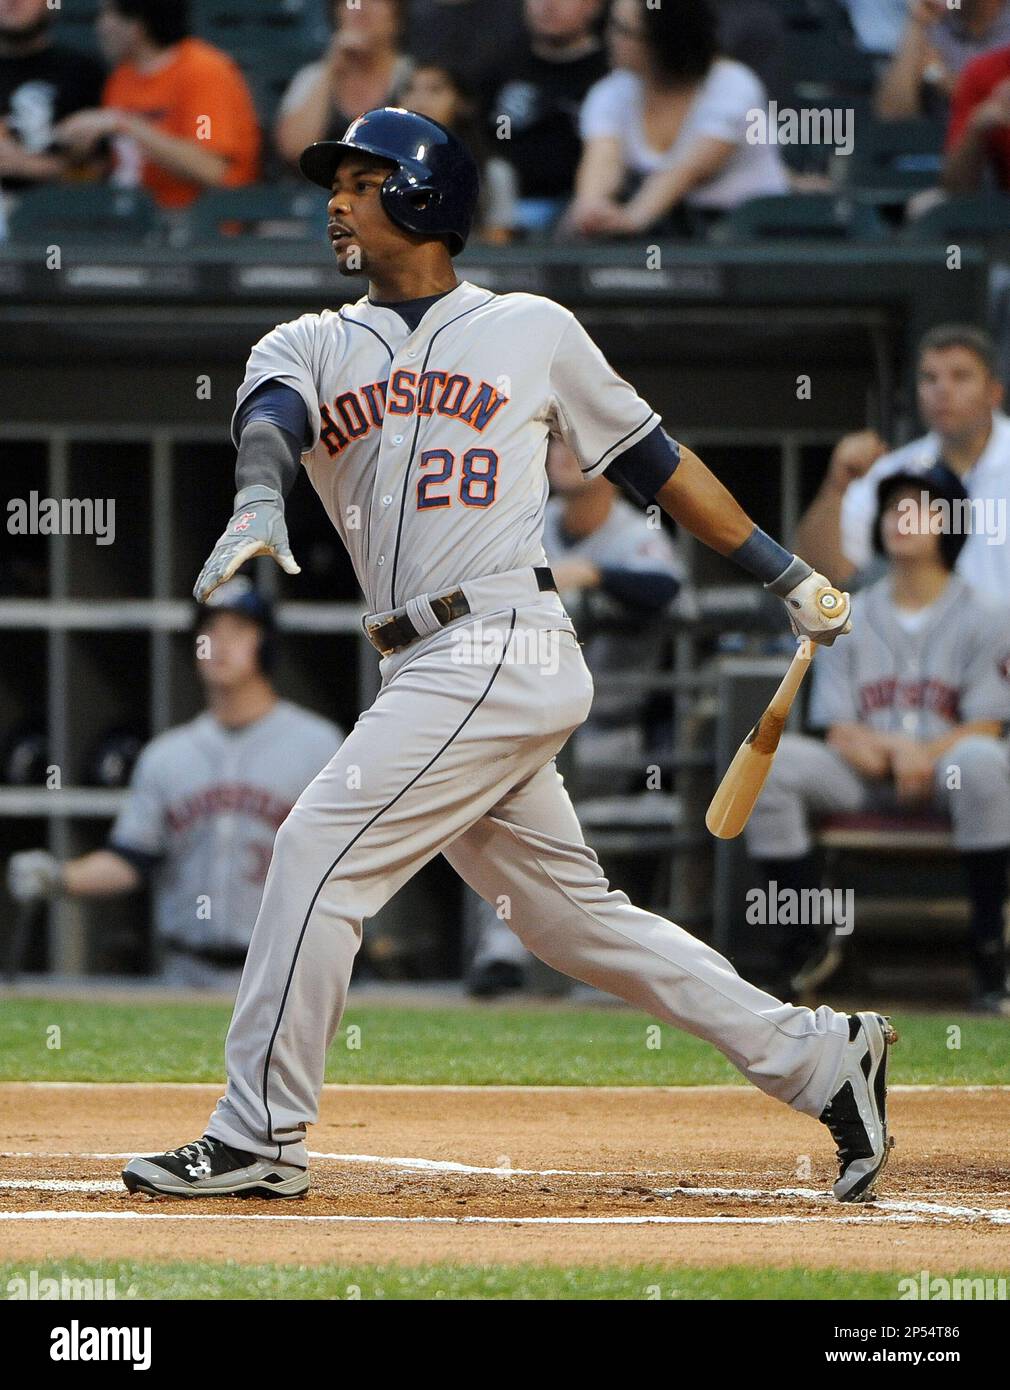 Houston Astros LJ Hoes (28) during a game against the Chicago White Sox on  August 28